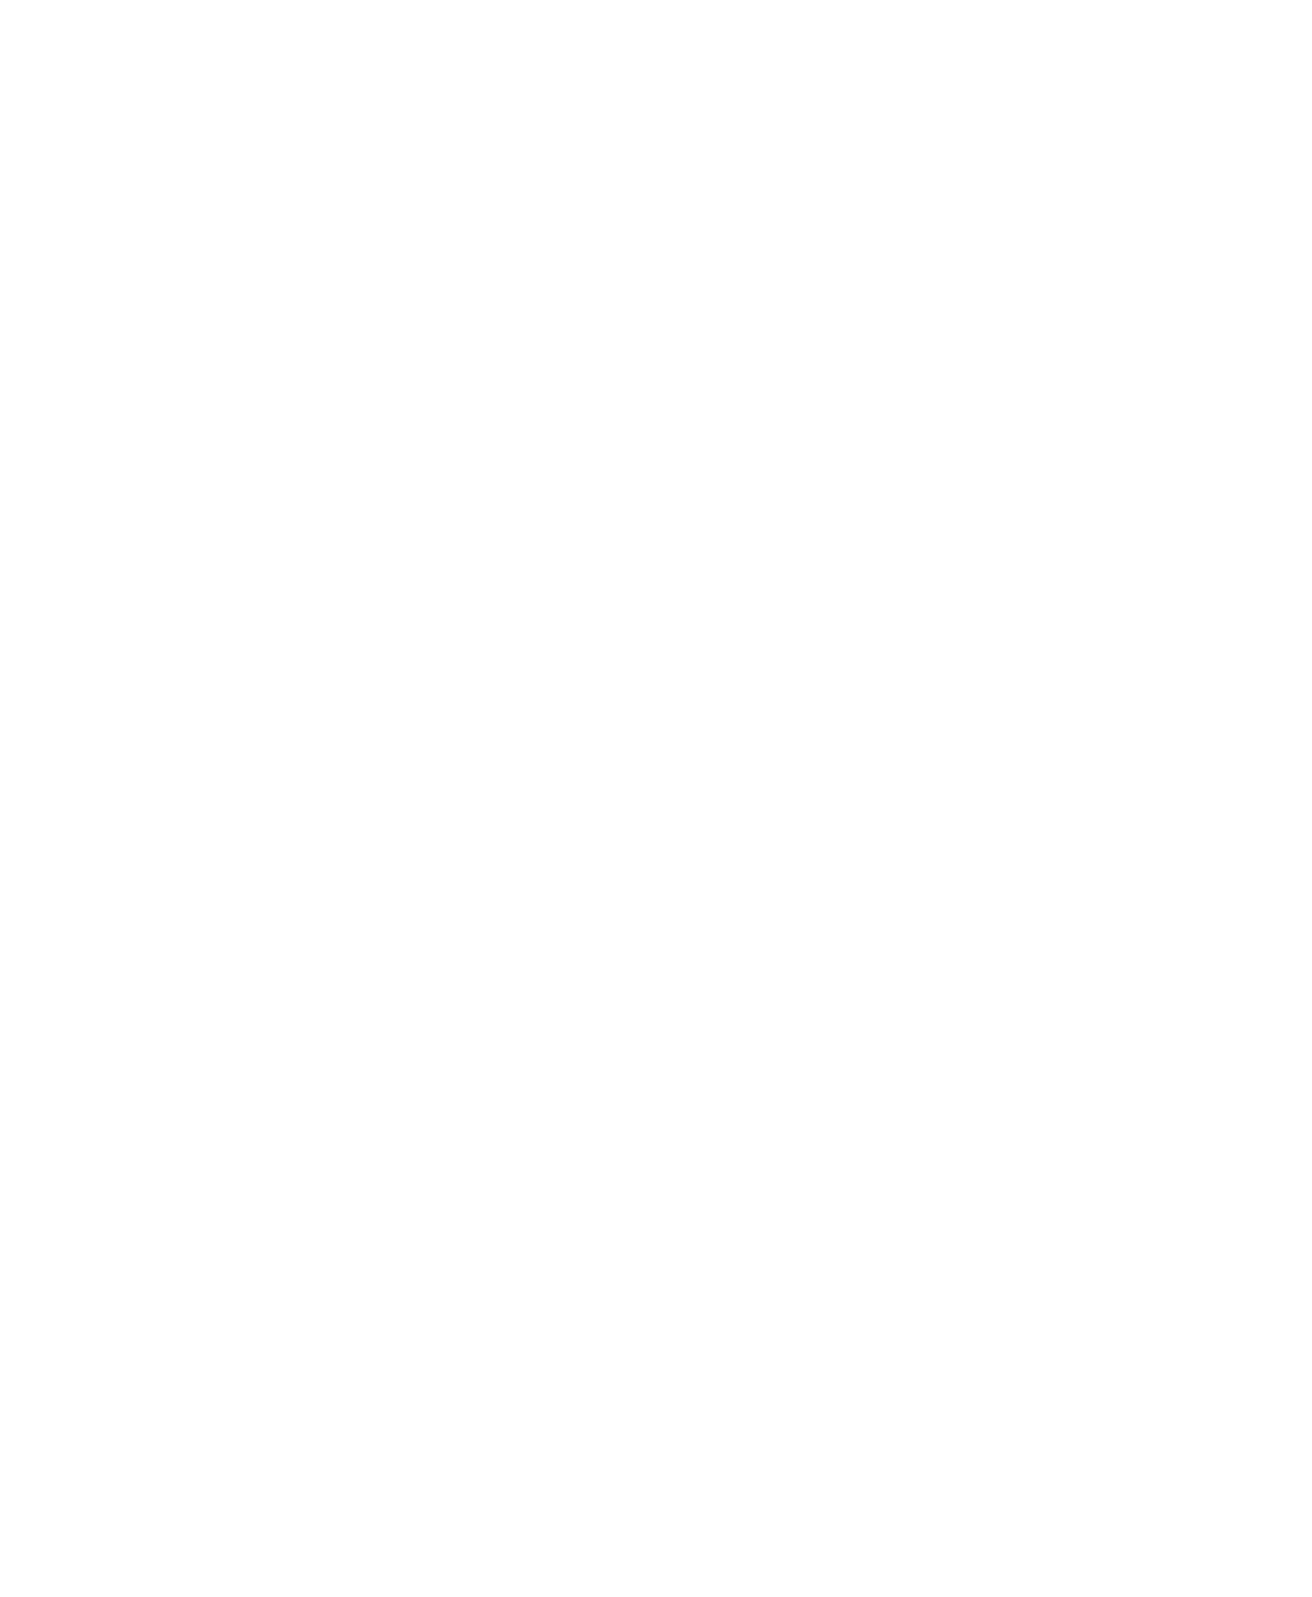 Office on the Bay